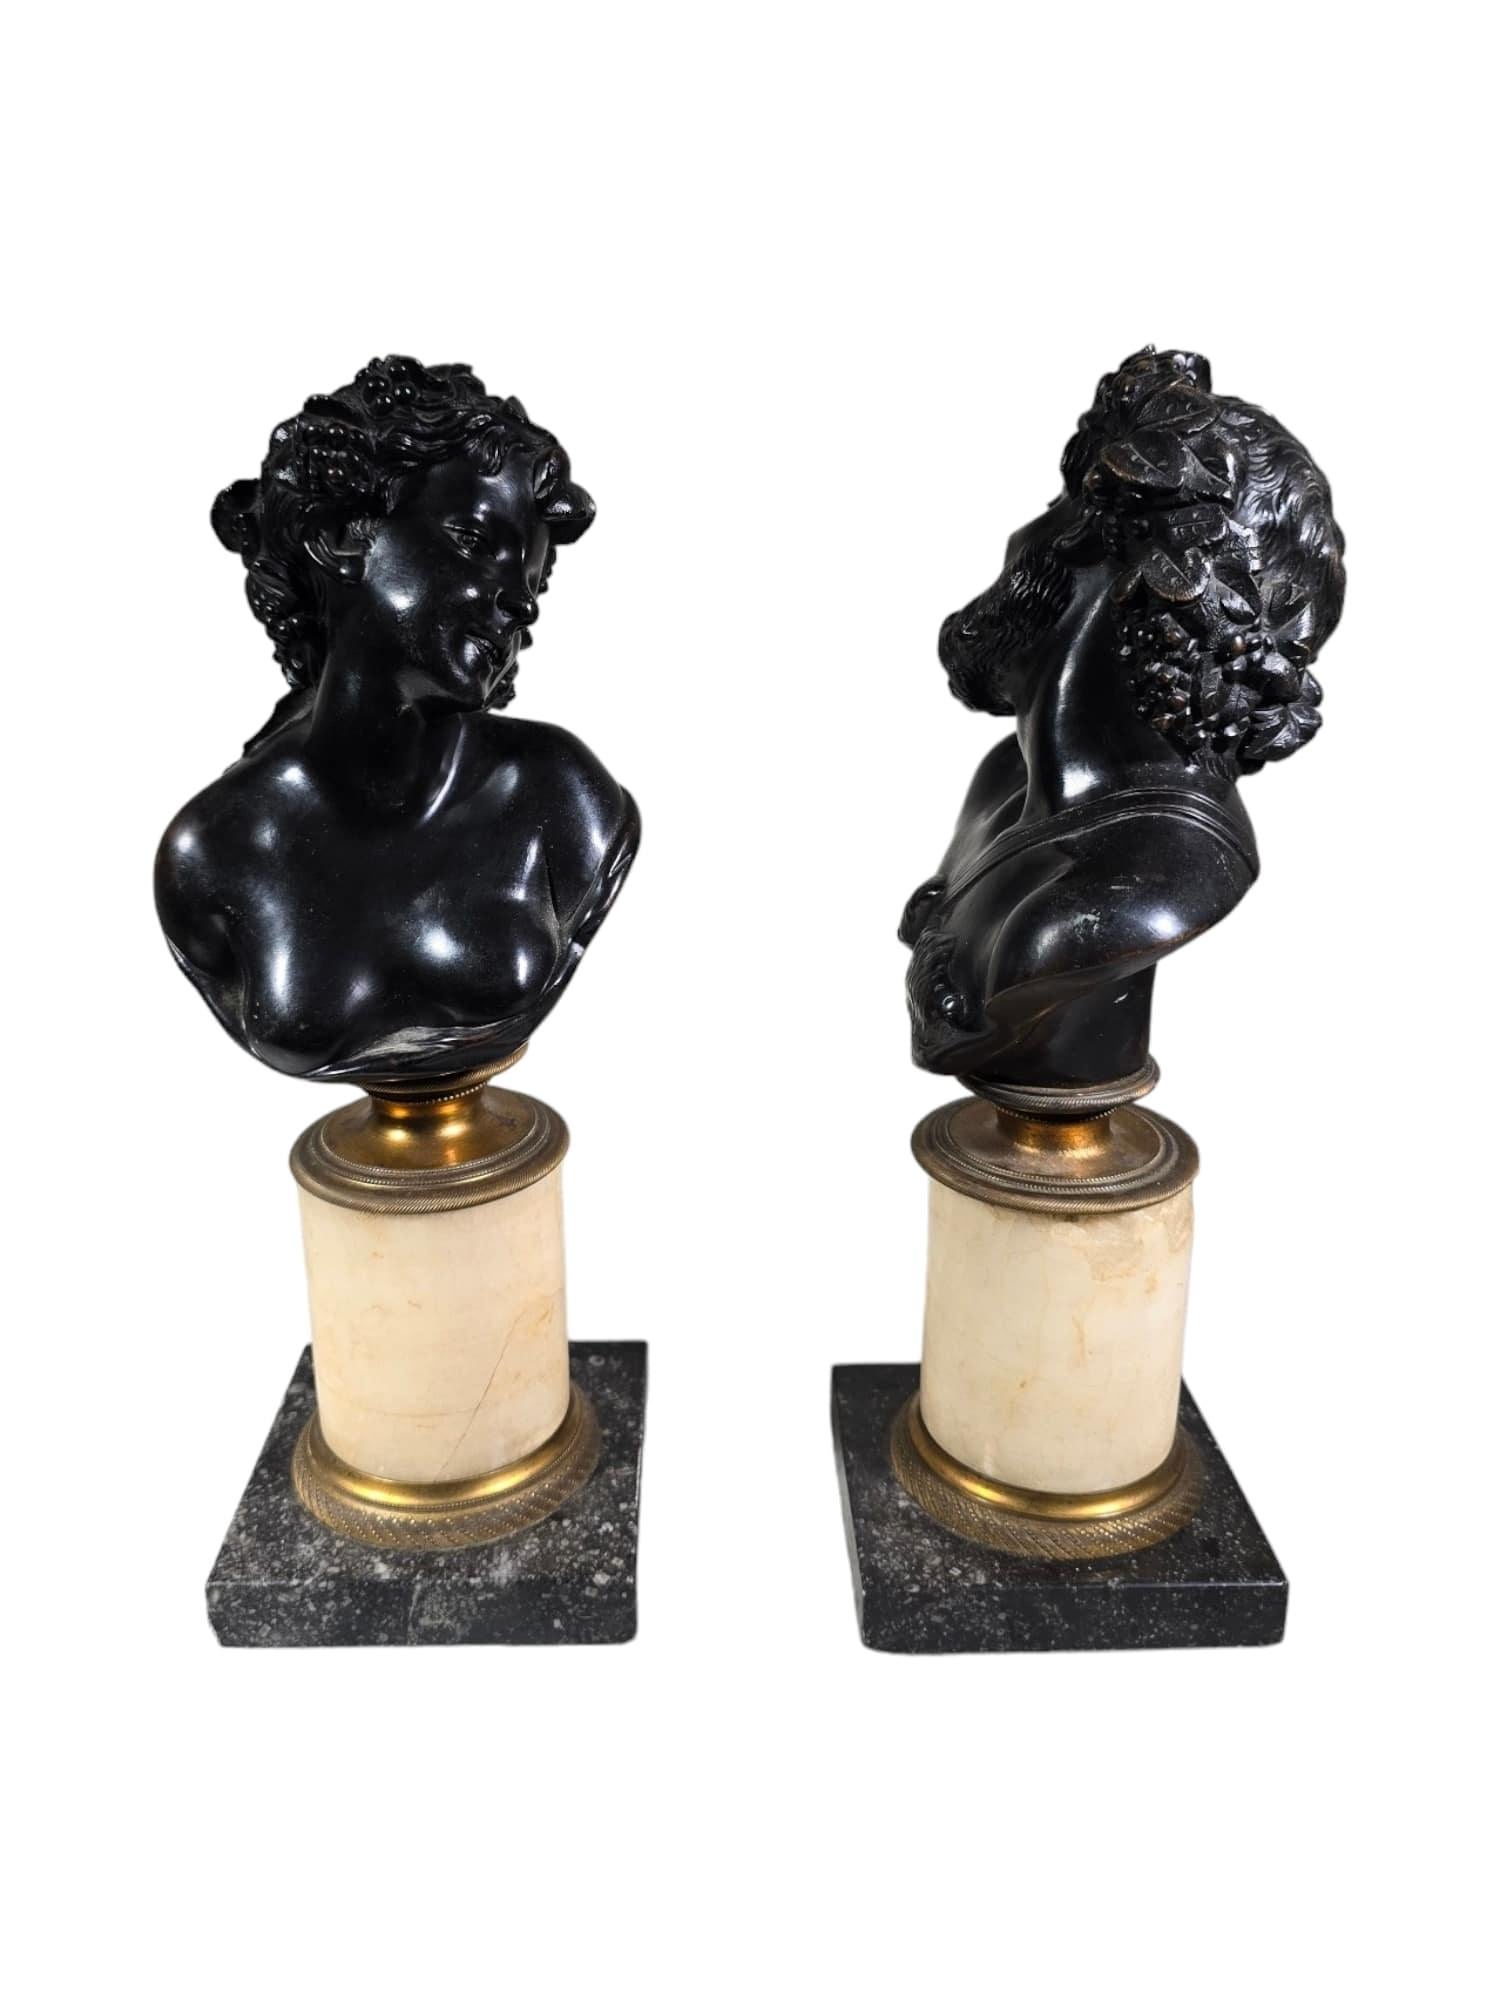 Antique Pair of Italian Bronze Busts: Dionysus and Ariadne, 19th Century For Sale 6